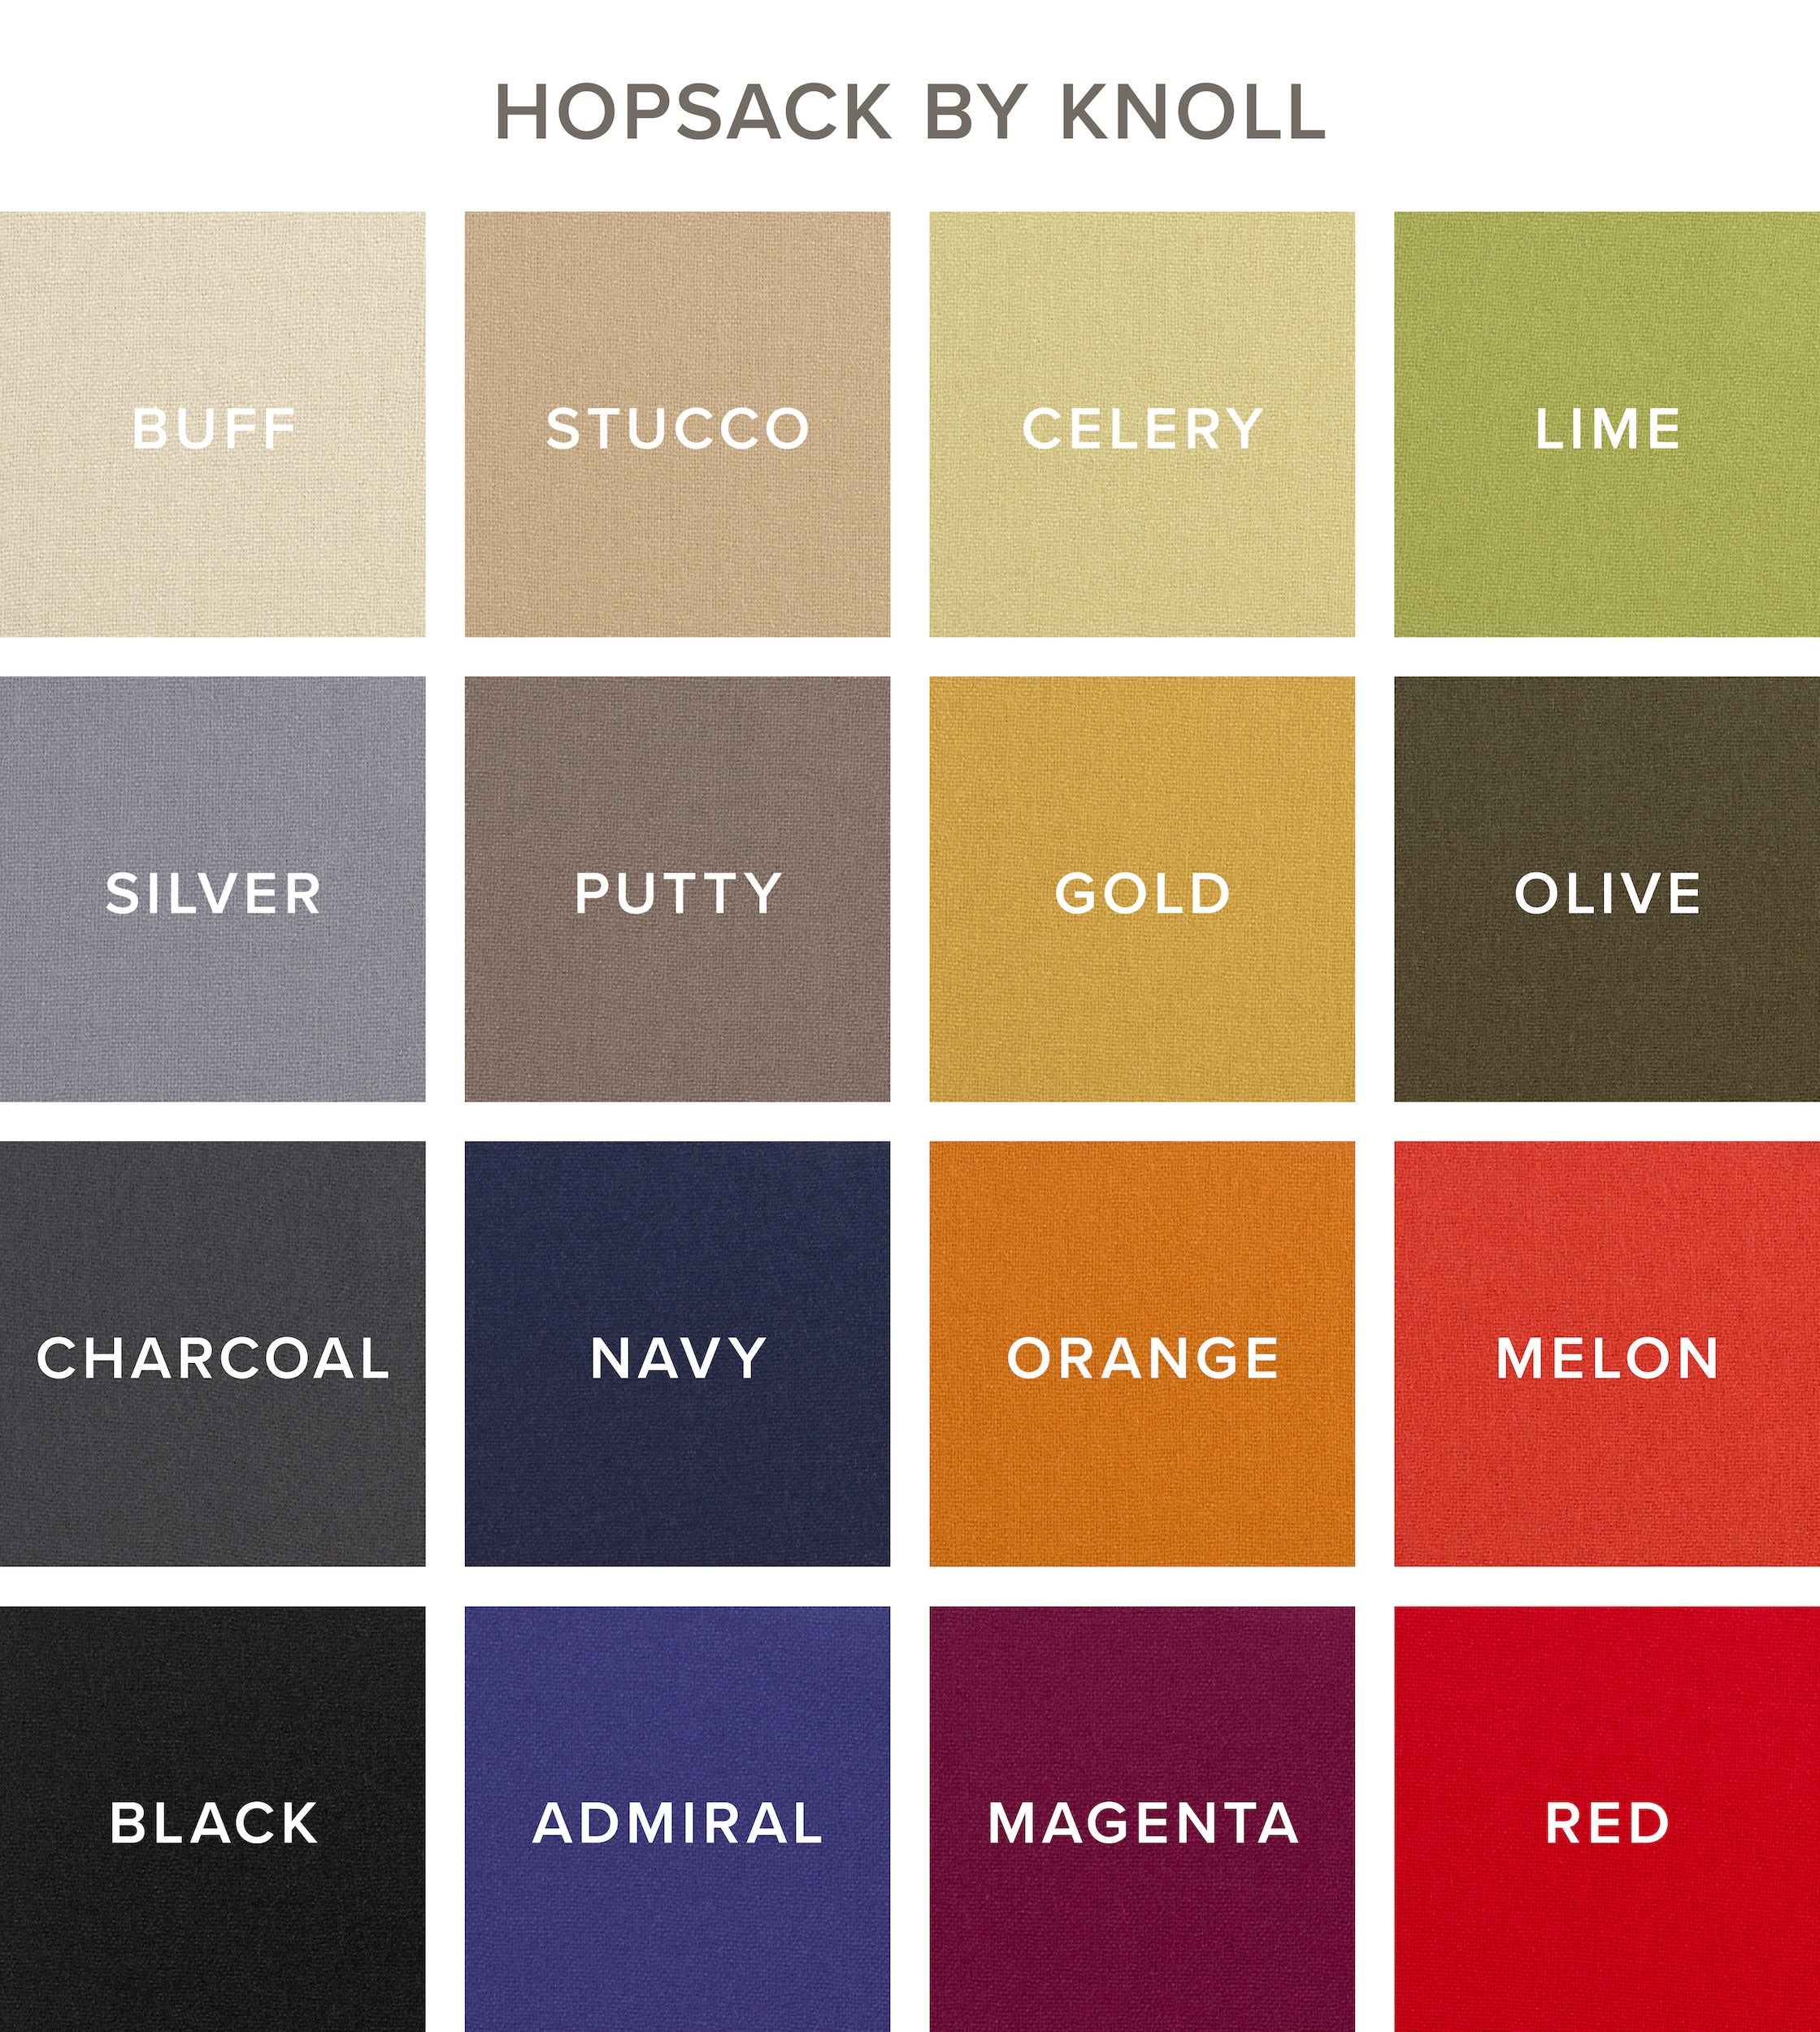 16 color swatches of Knoll Hopsack fabric options for Chilton Furniture's Nautilus Lounge Chair